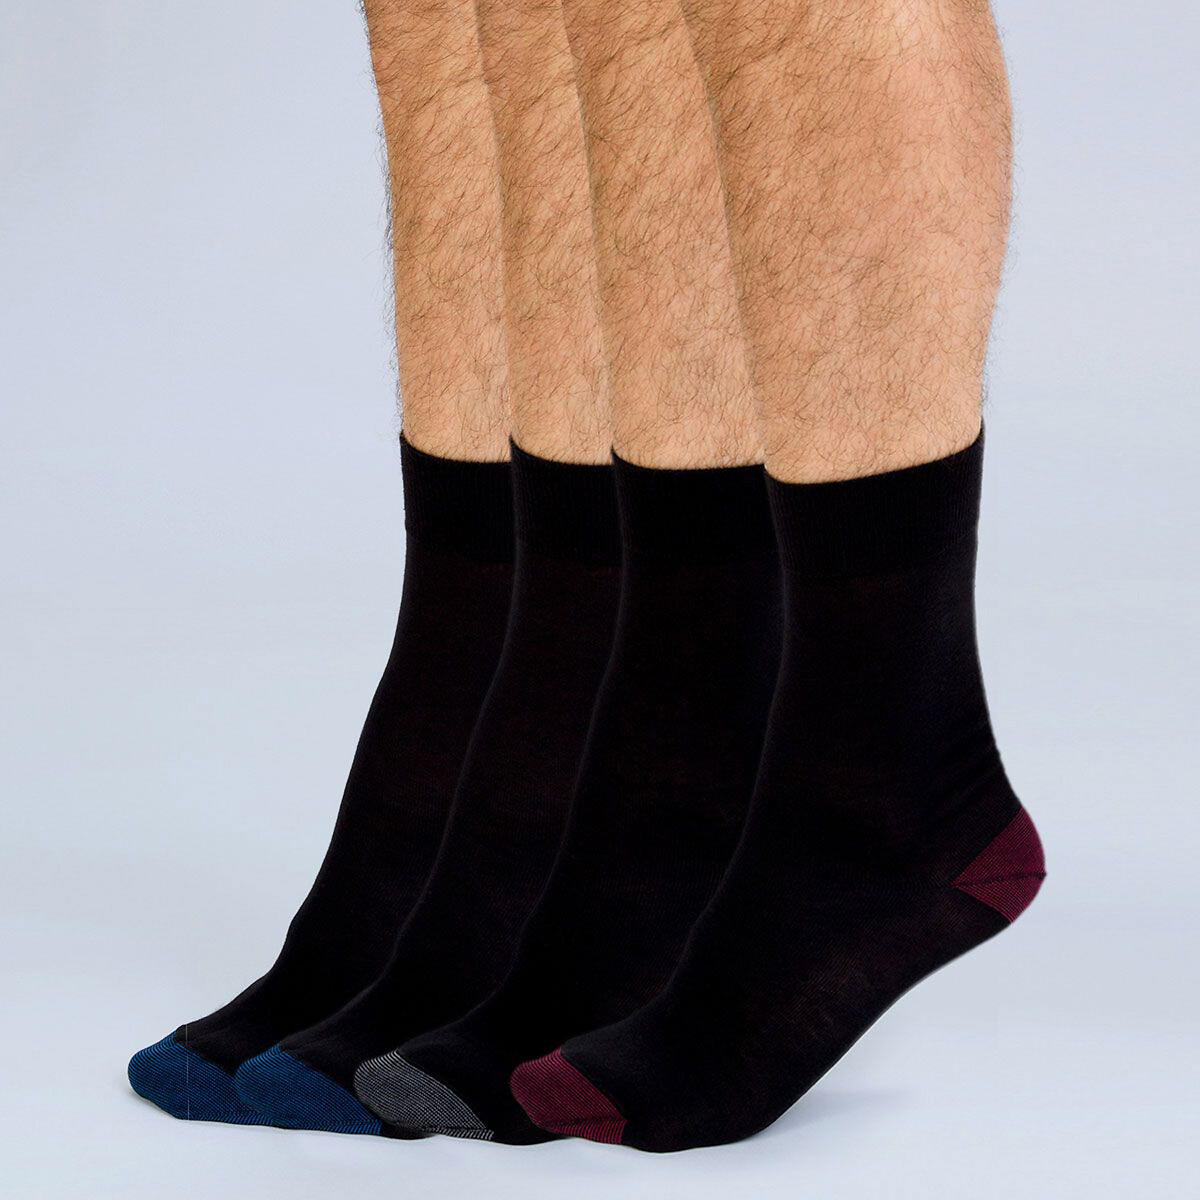 Pack of 3 Pairs of Mix & Match Socks in Cotton Mix